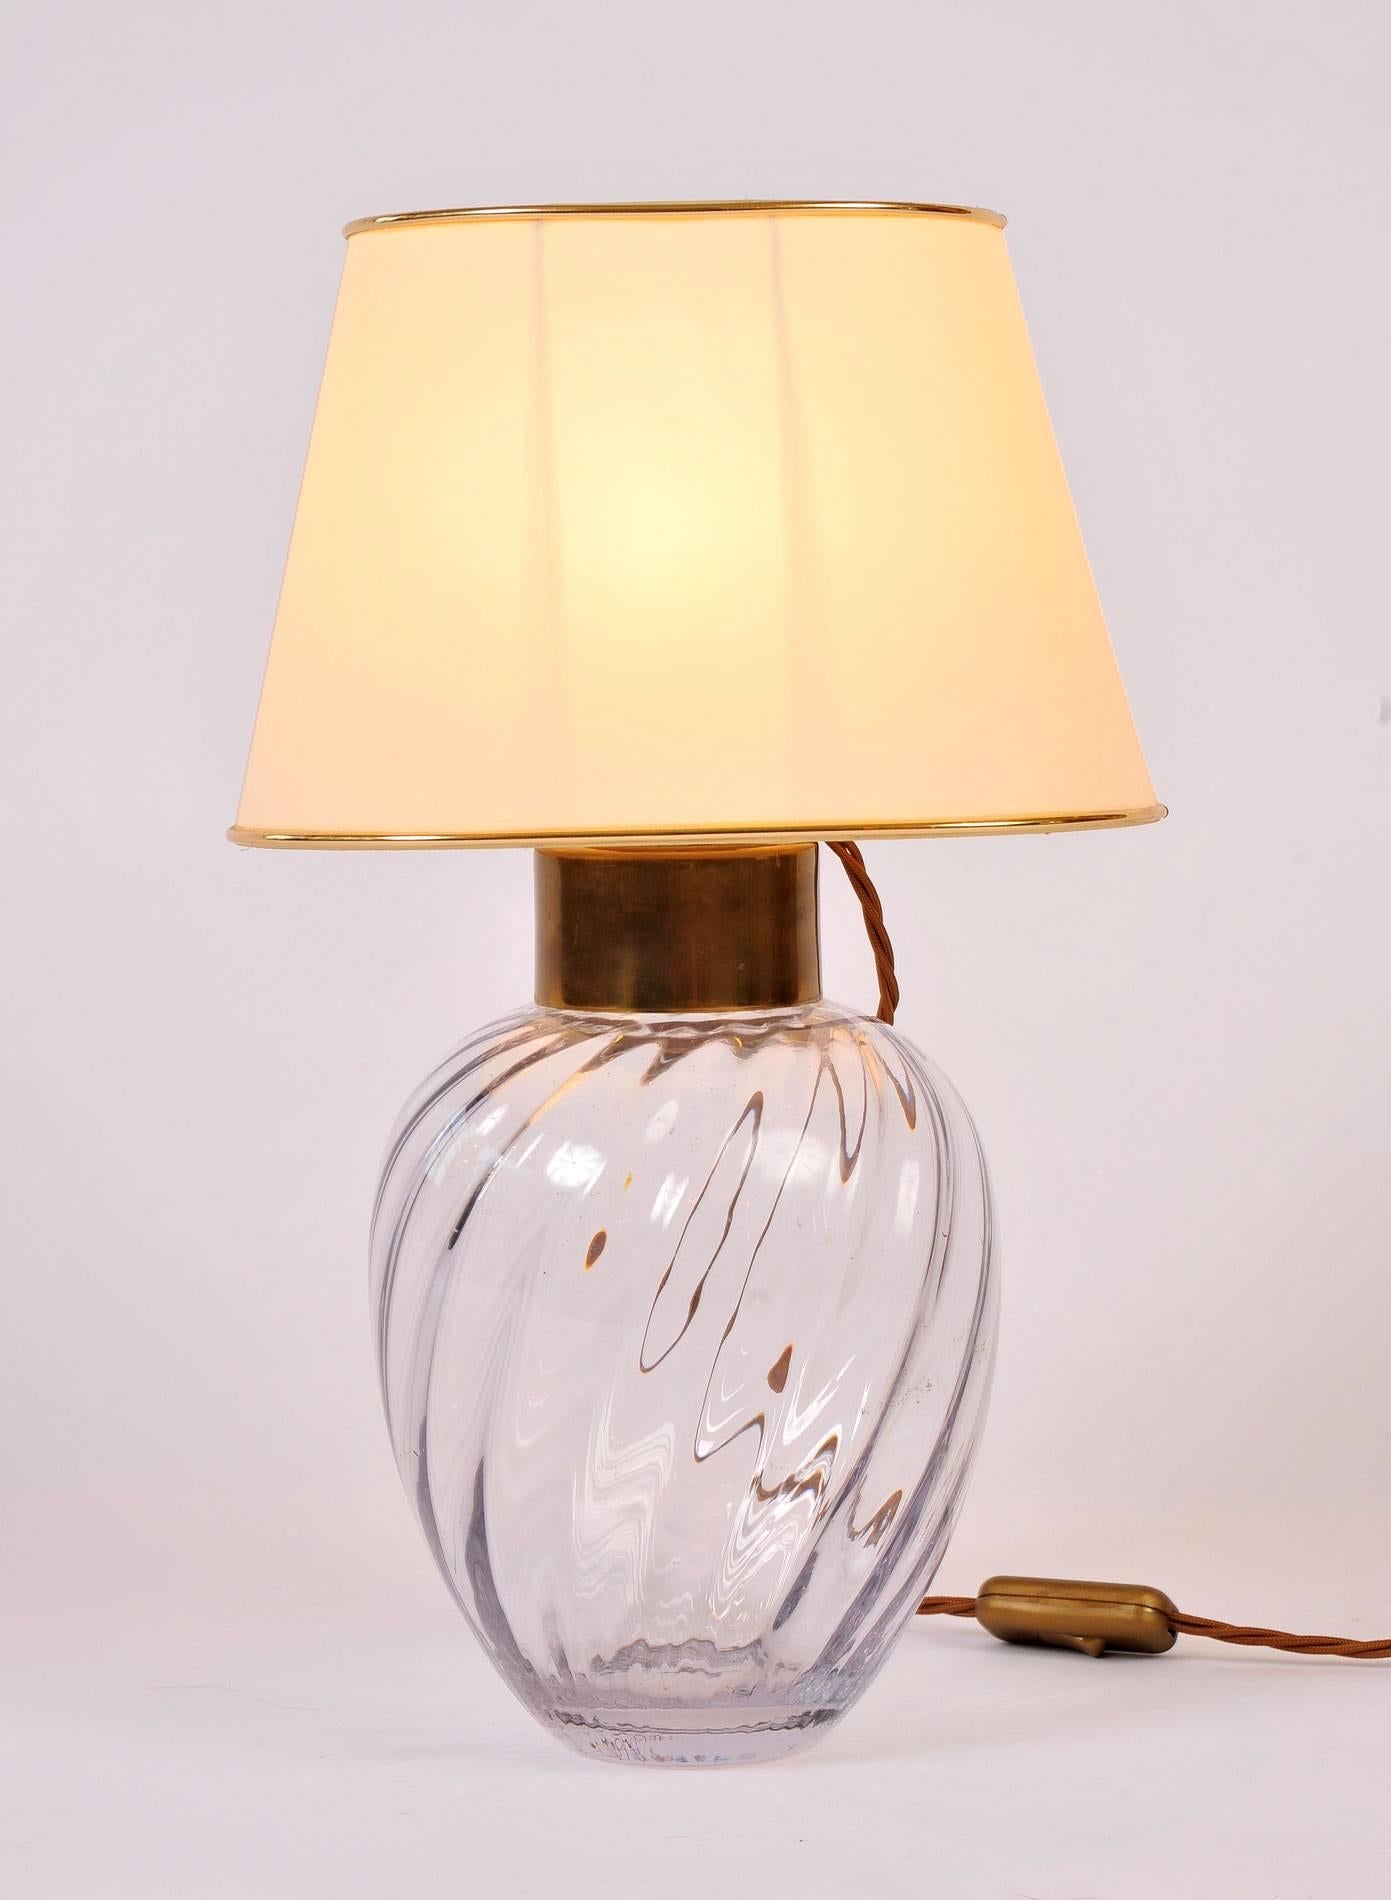 Boldly swirled glass lamps with generous brass fittings. Original parchment shades with gold trim.